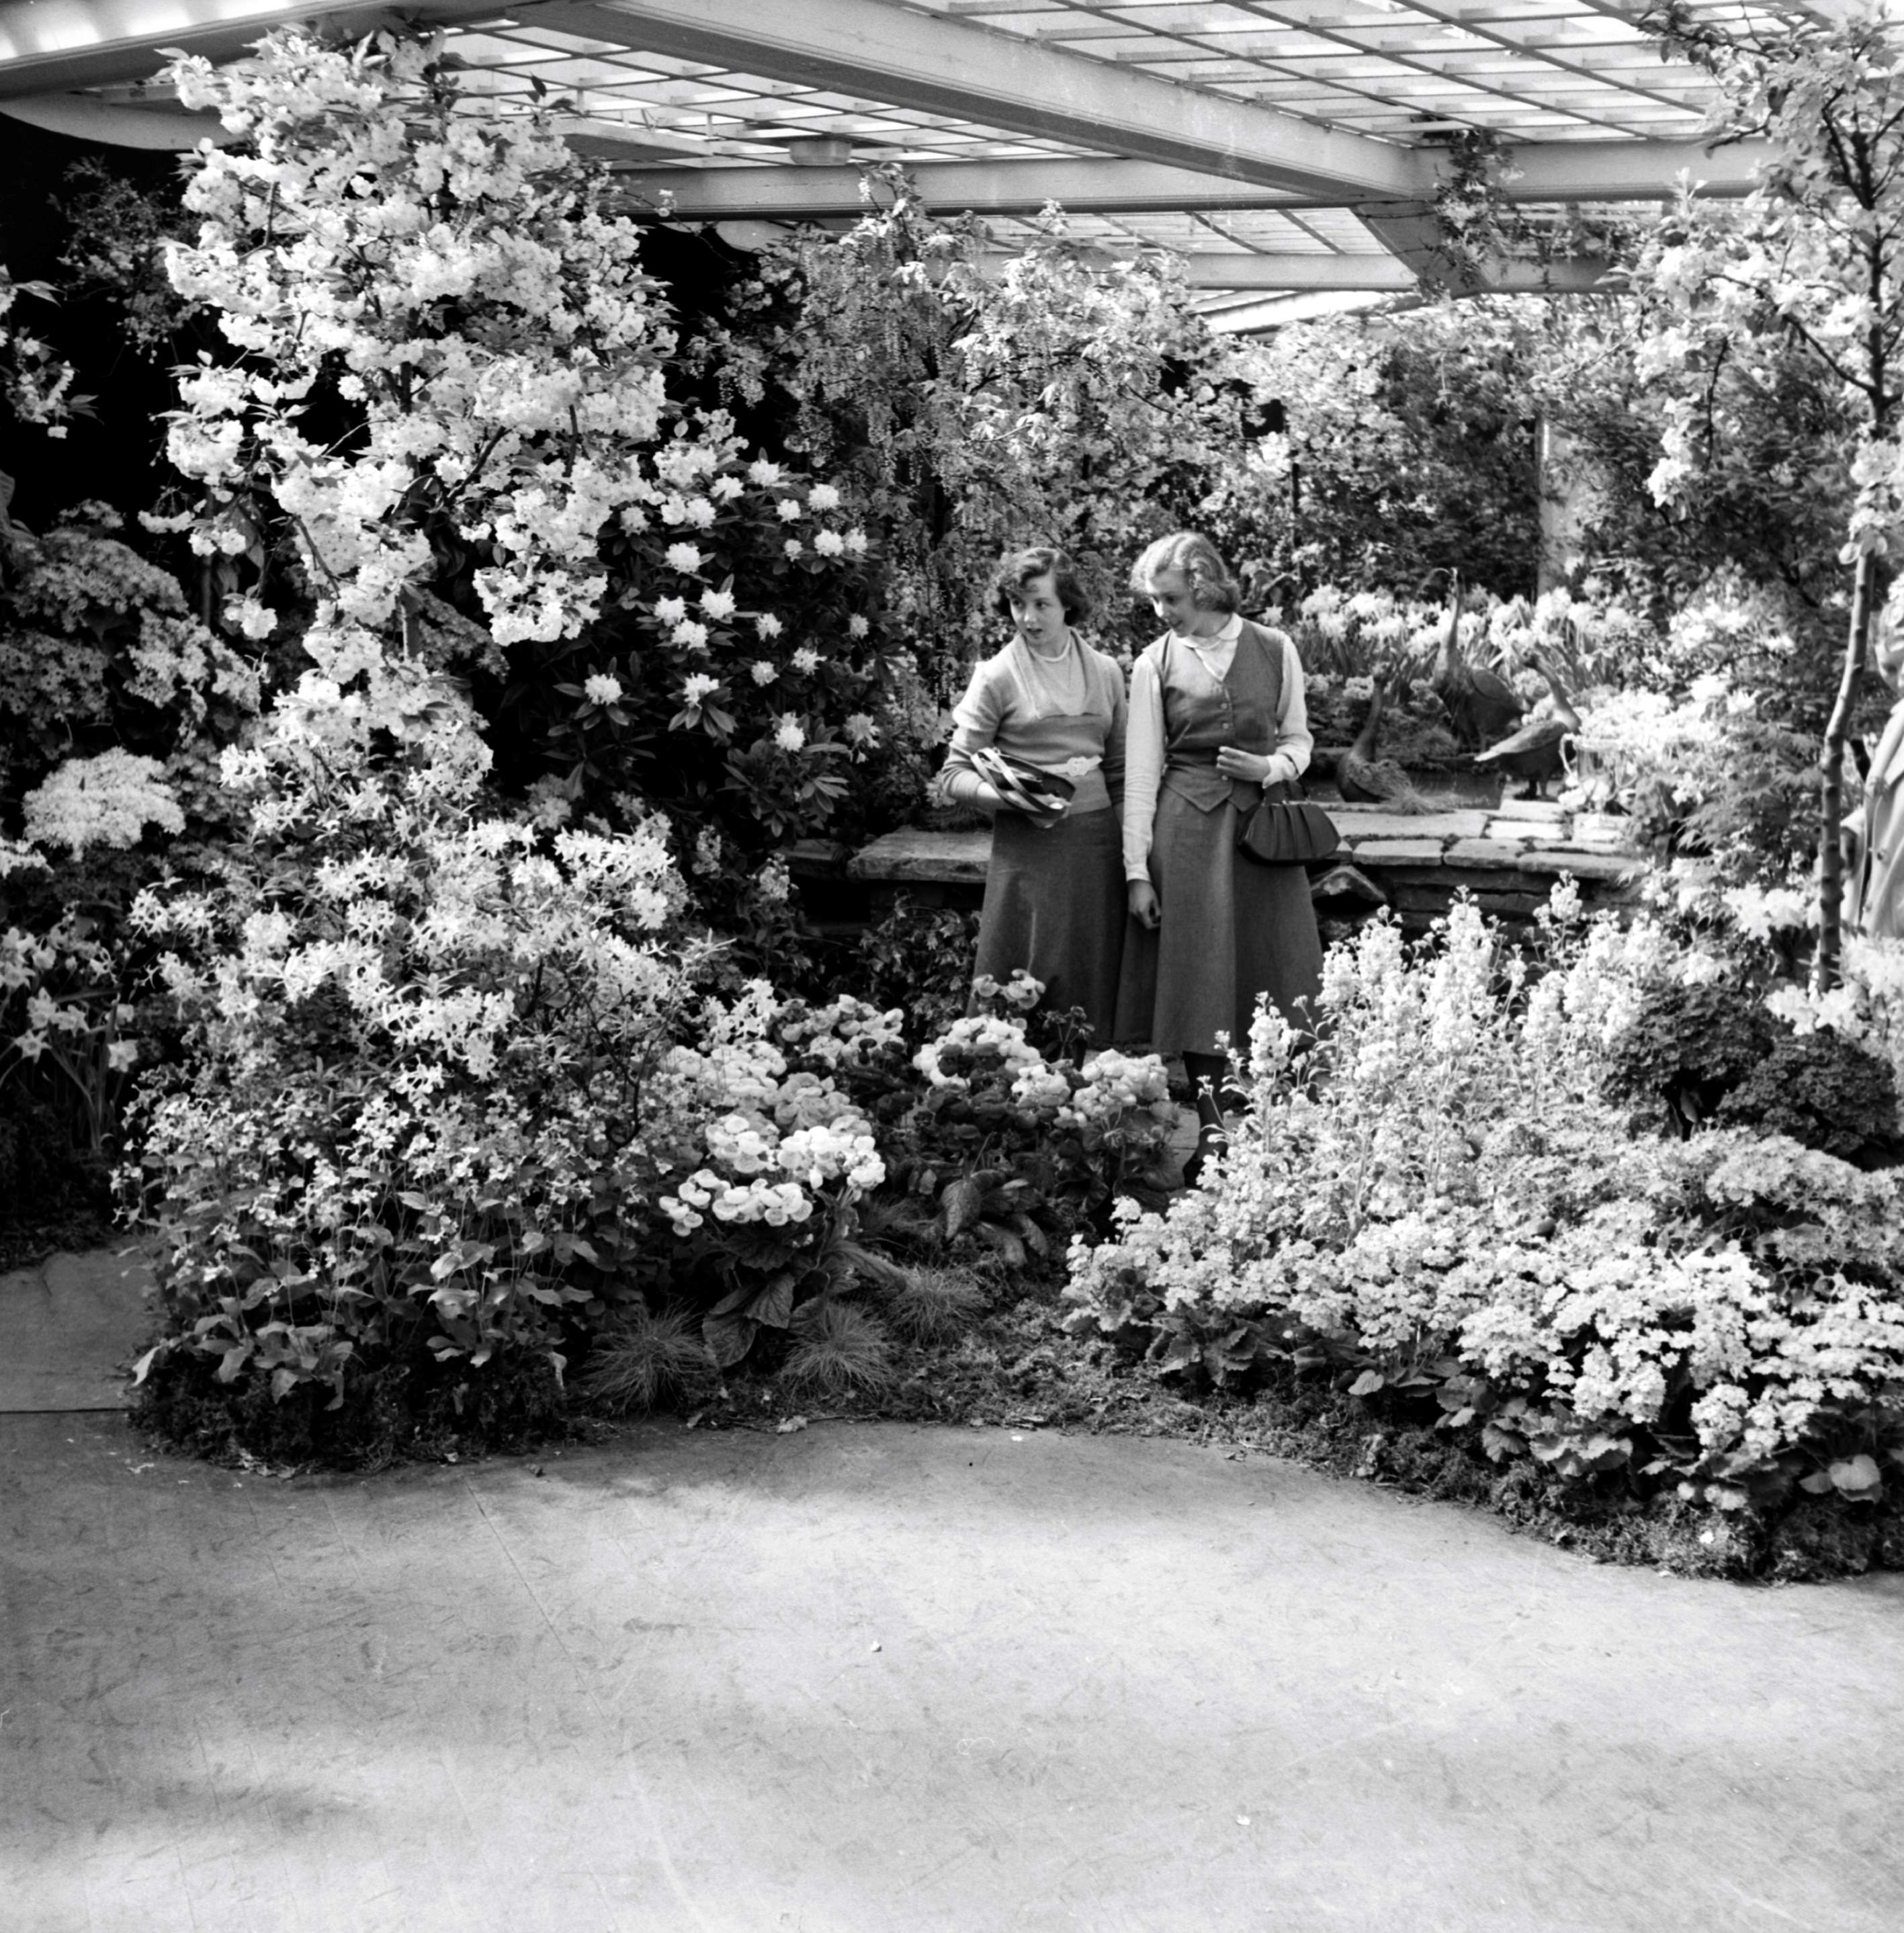 Ladies choosing plants at the Harrogate Spring Flower Festival (undated), from the Bertram Unné photographic collection.